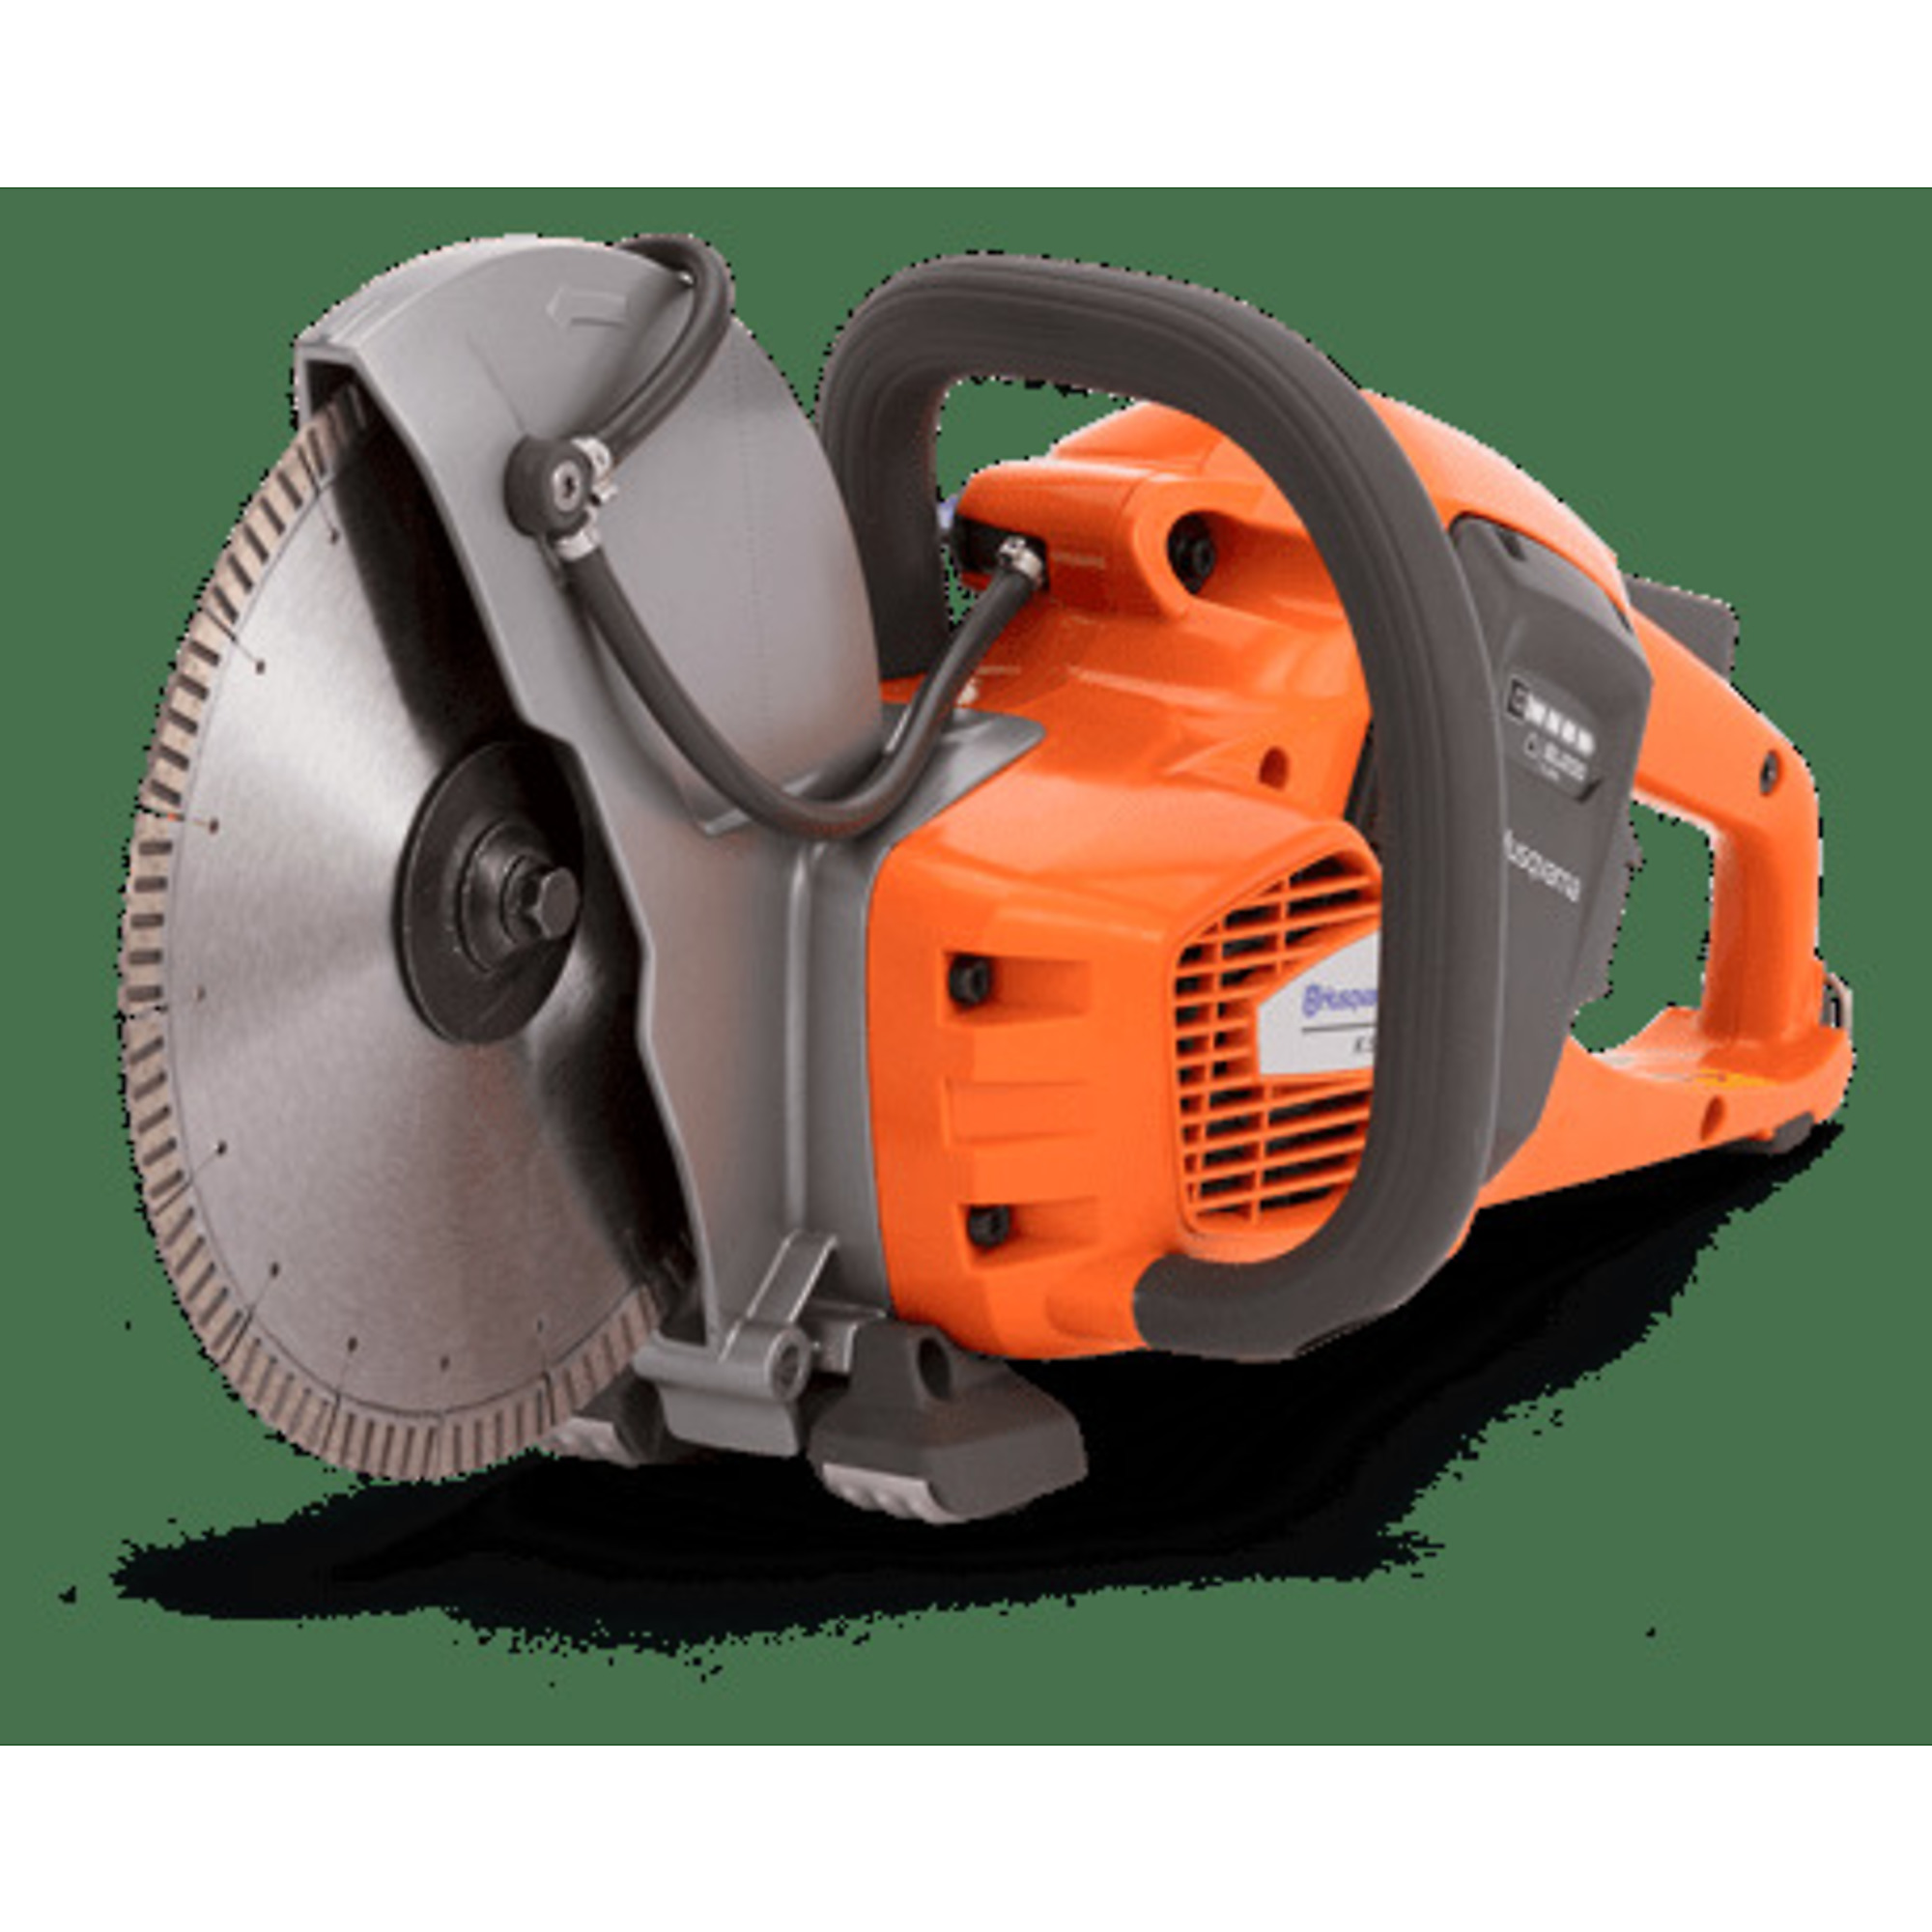 Husqvarna K 535i Cut Off Saw Battery and Blade Included